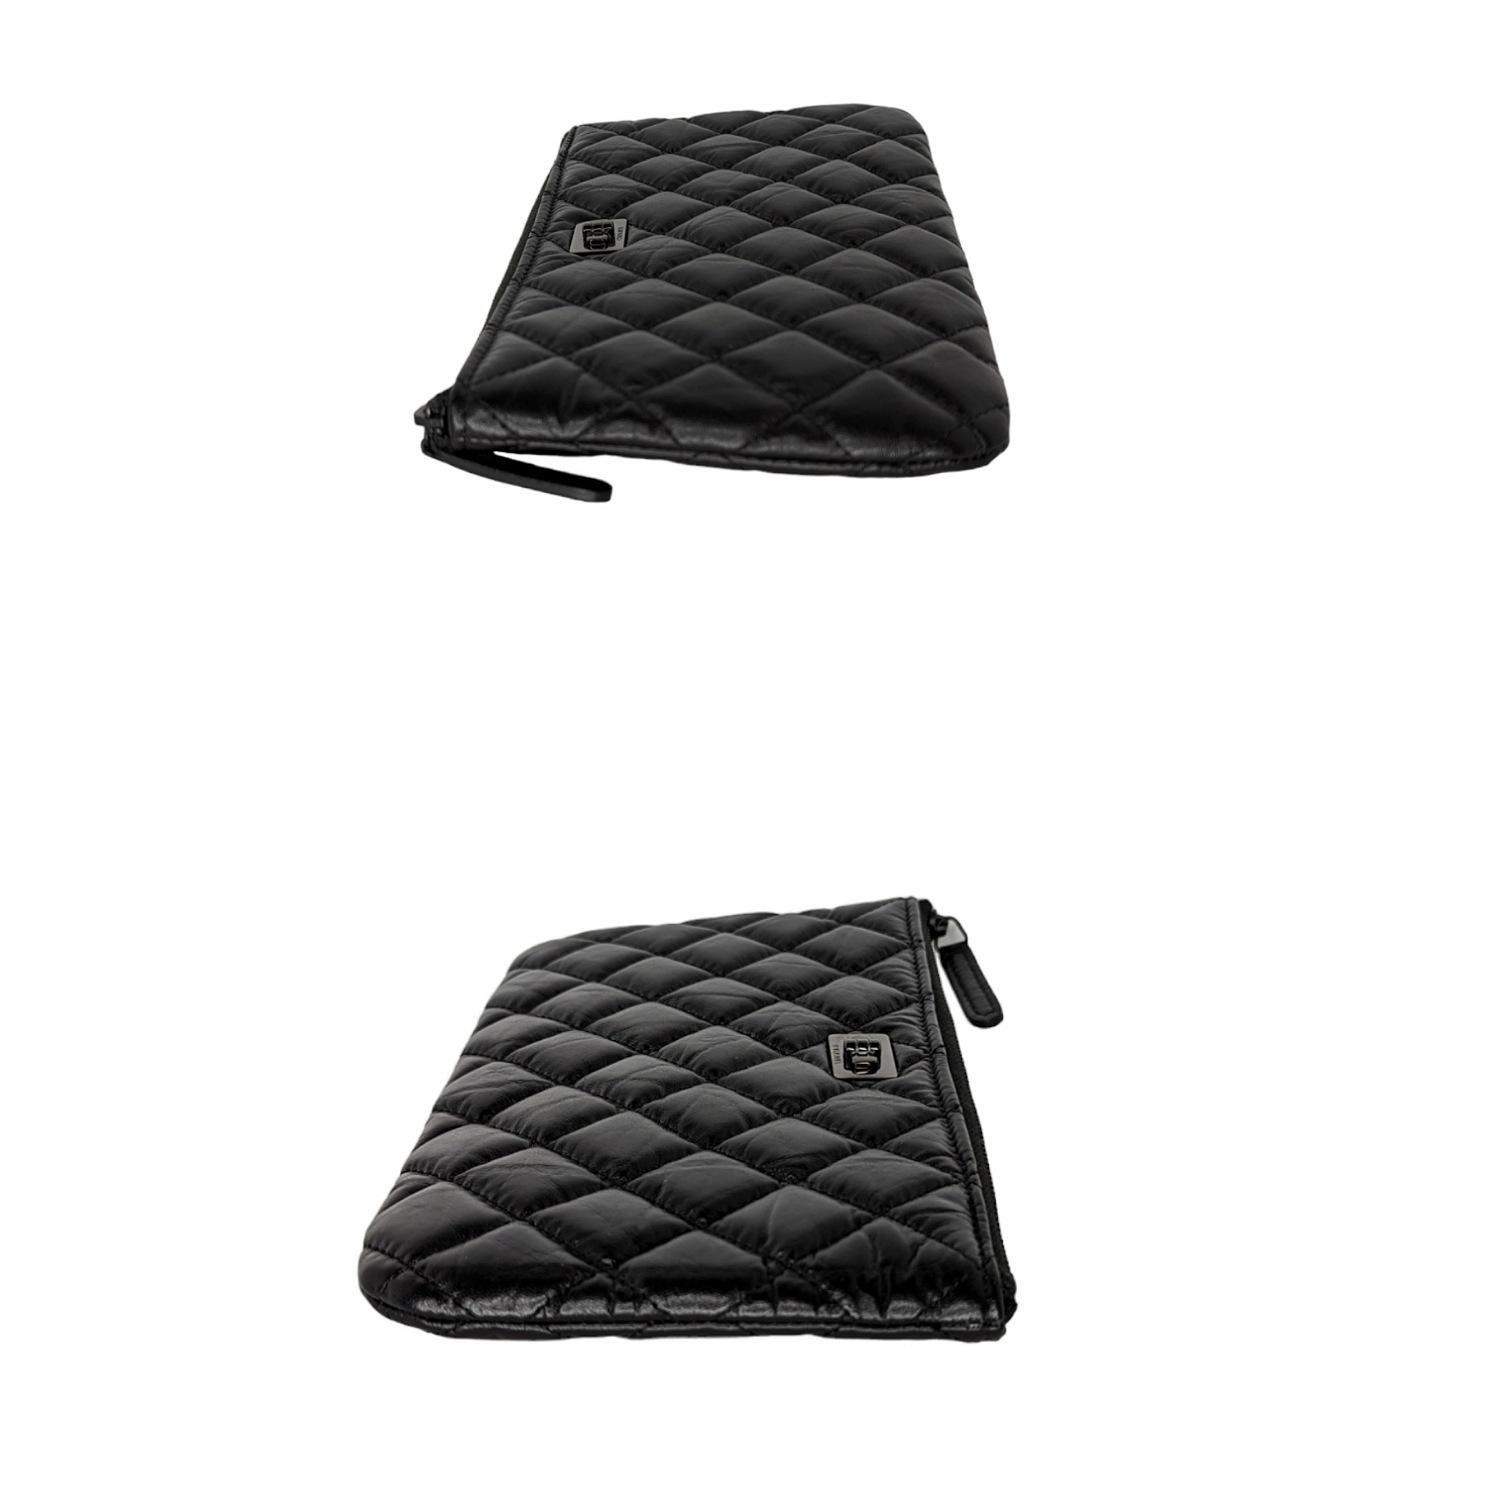 Chanel Black Aged Calfskin O Case 2.55 Reissue Pouch In Excellent Condition For Sale In Scottsdale, AZ